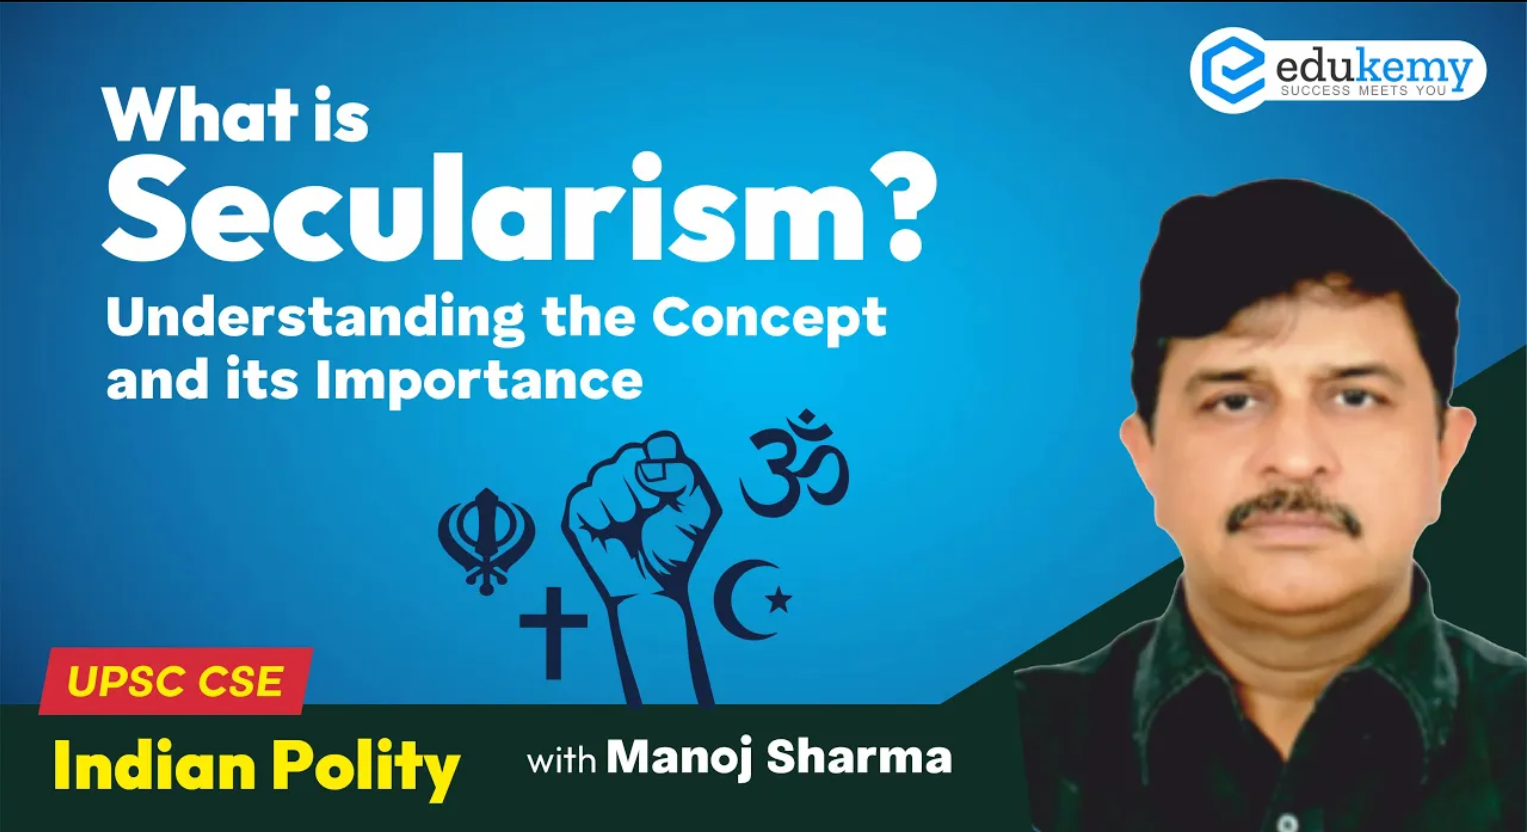 What is Secularism? - Understanding the Concept and its Importance | UPSC CSE/IAS | Edukemy